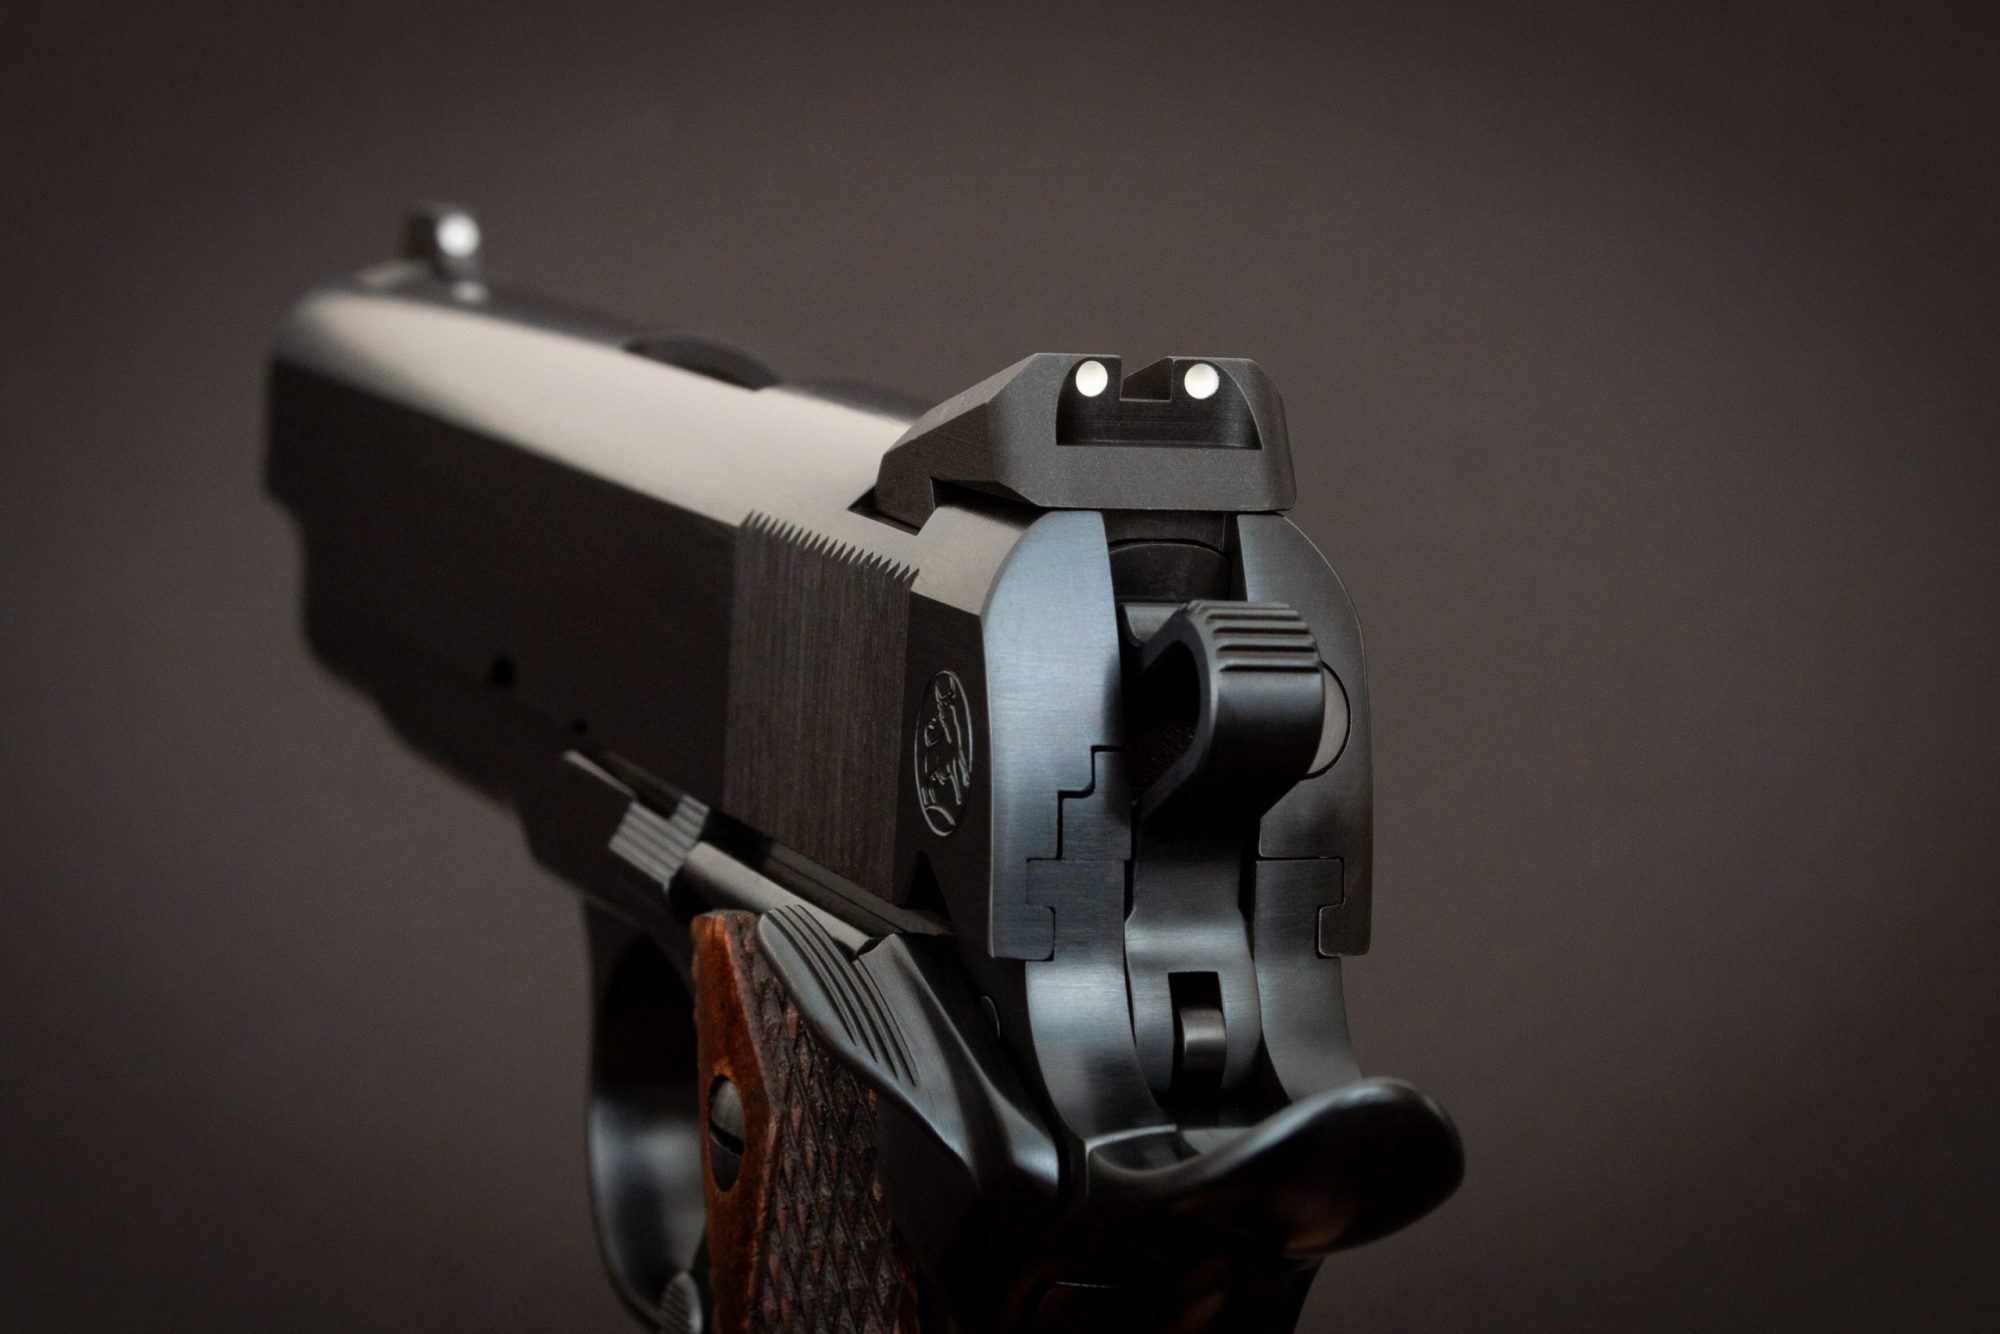 Photo of a Turnbull Model 1911 Commander, featuring traditional charcoal bluing